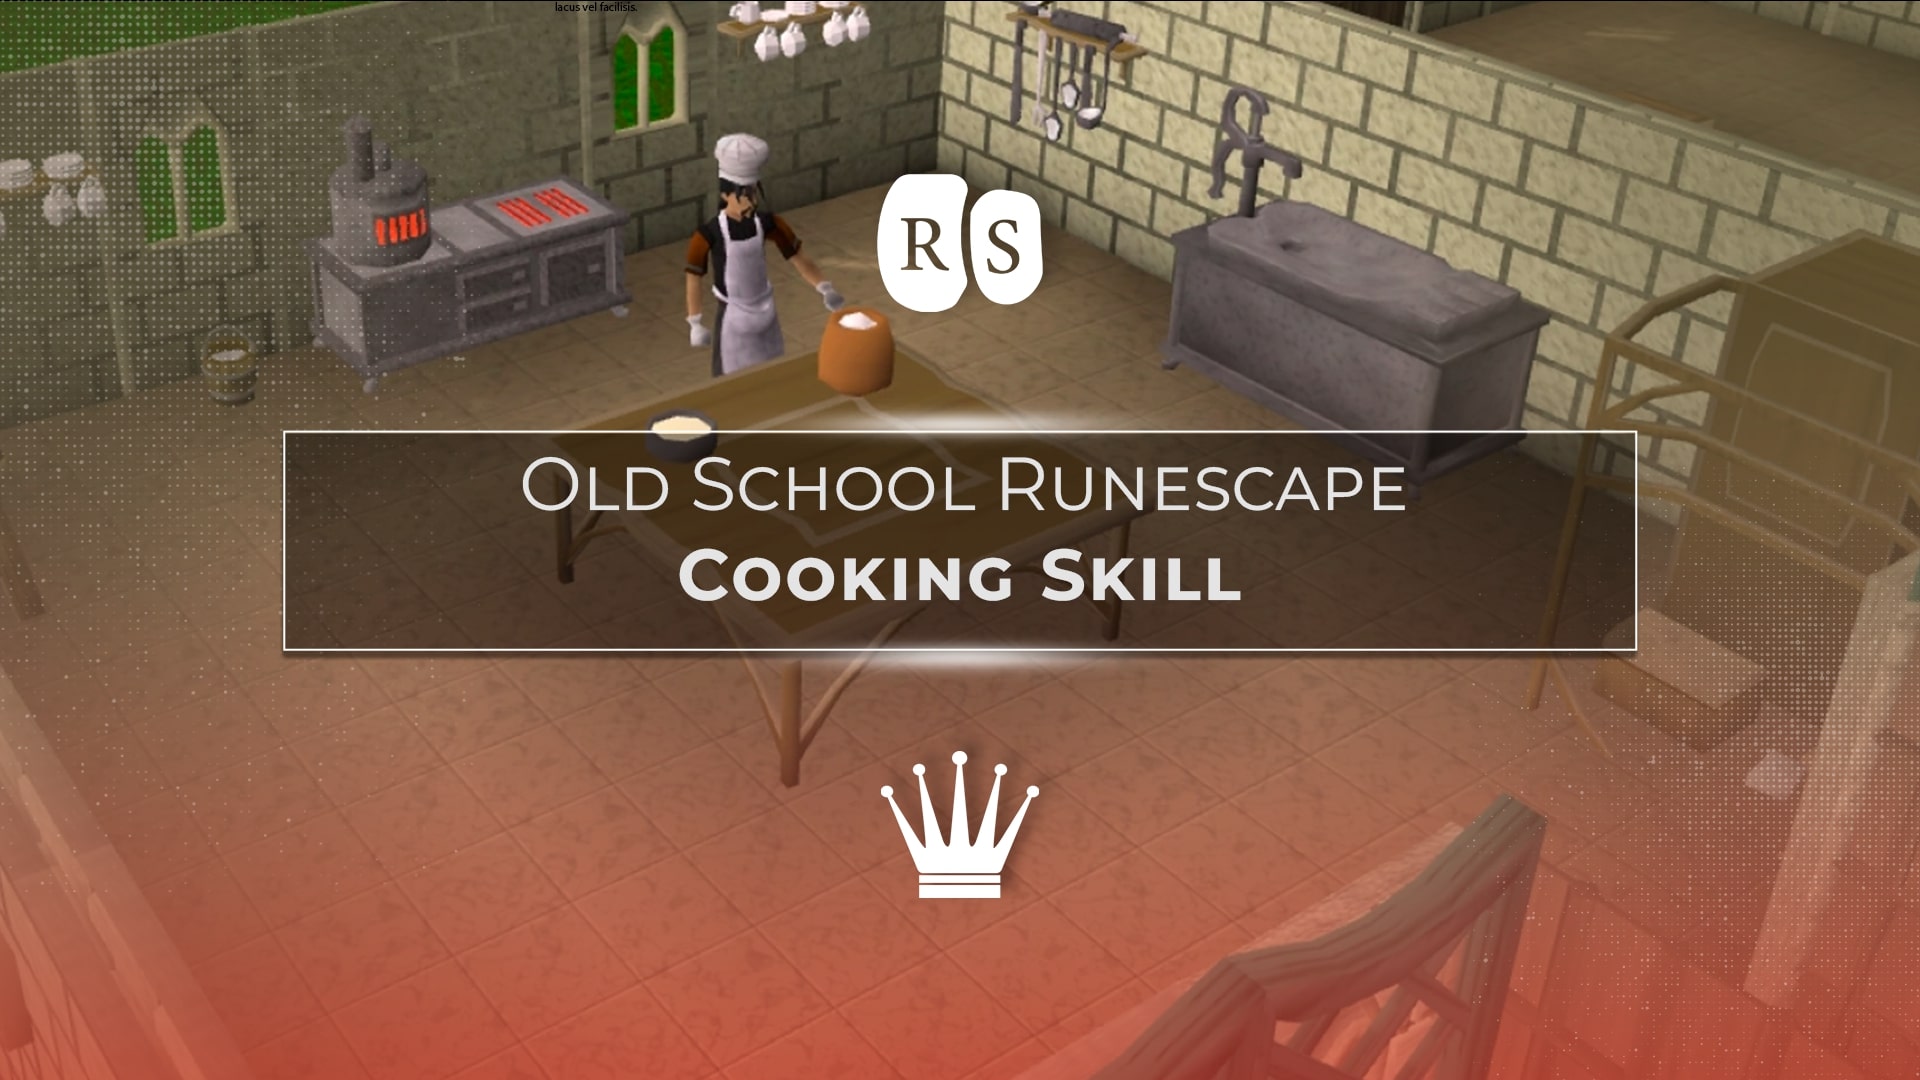 Oldschool Runescape & Runescape 3 v2 - the job you pay to play - Knockout!